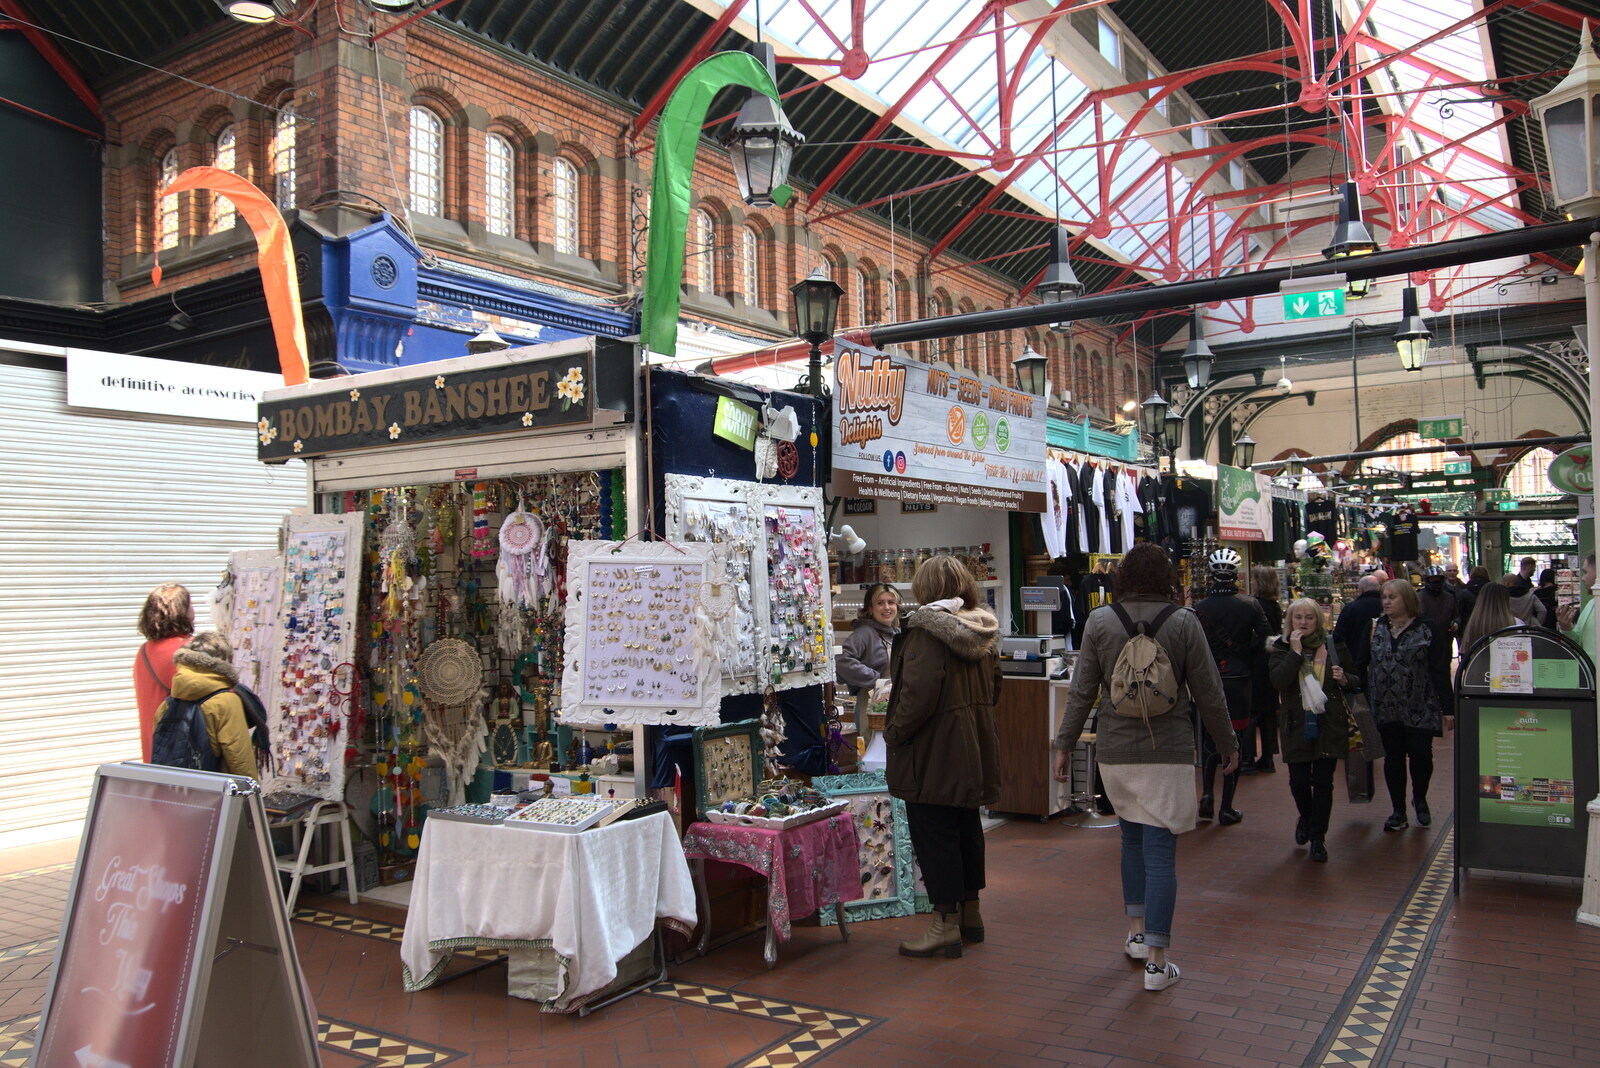 Blackrock North and South, Louth and County Dublin, Ireland - 23rd April 2022: George's Street Arcade in Dublin